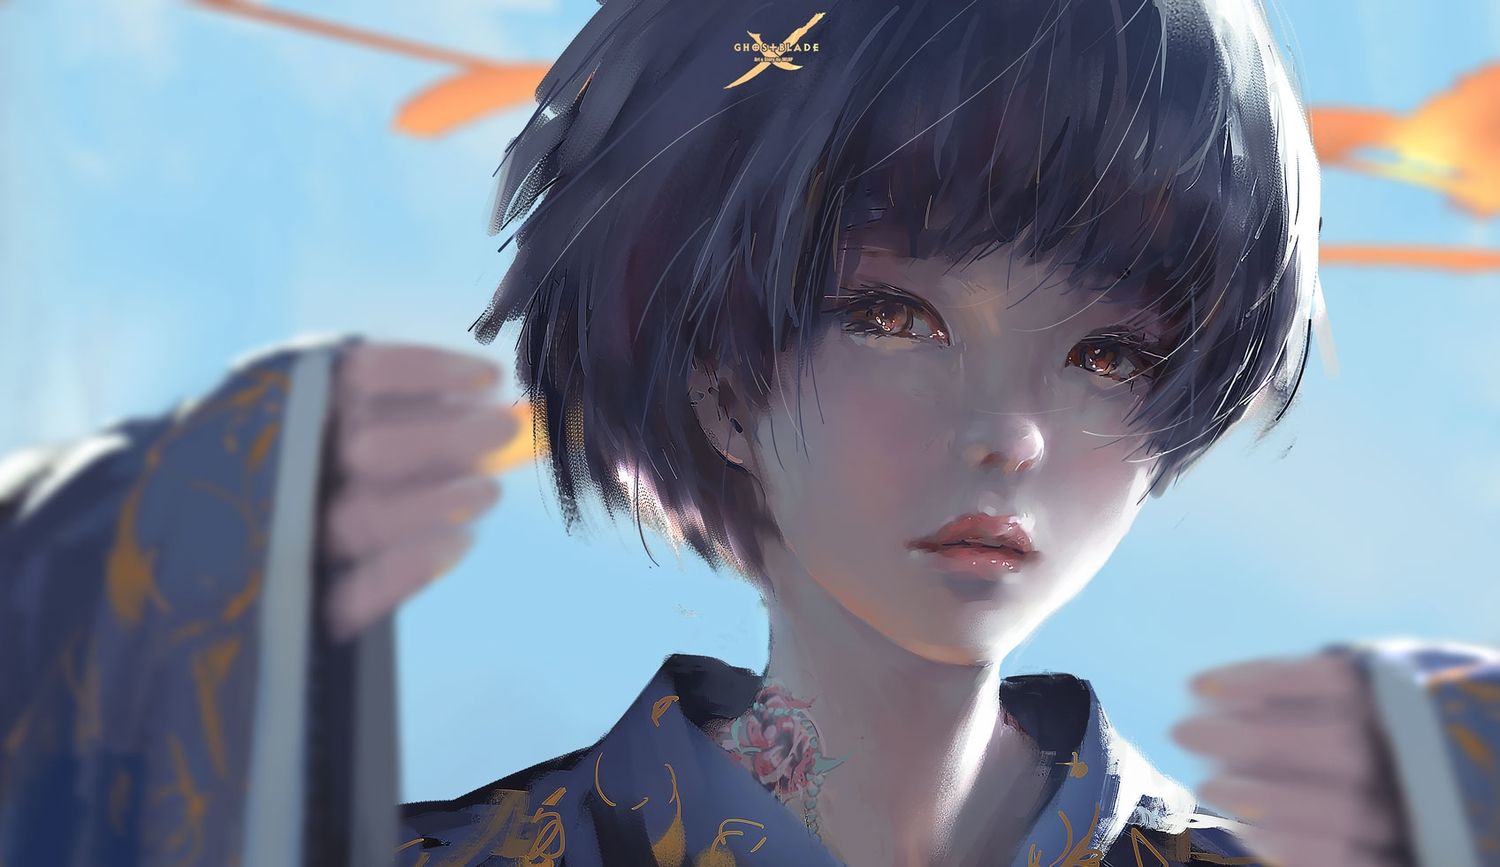 Realistic Anime Girl Short Hair Wallpapers - Wallpaper Cave